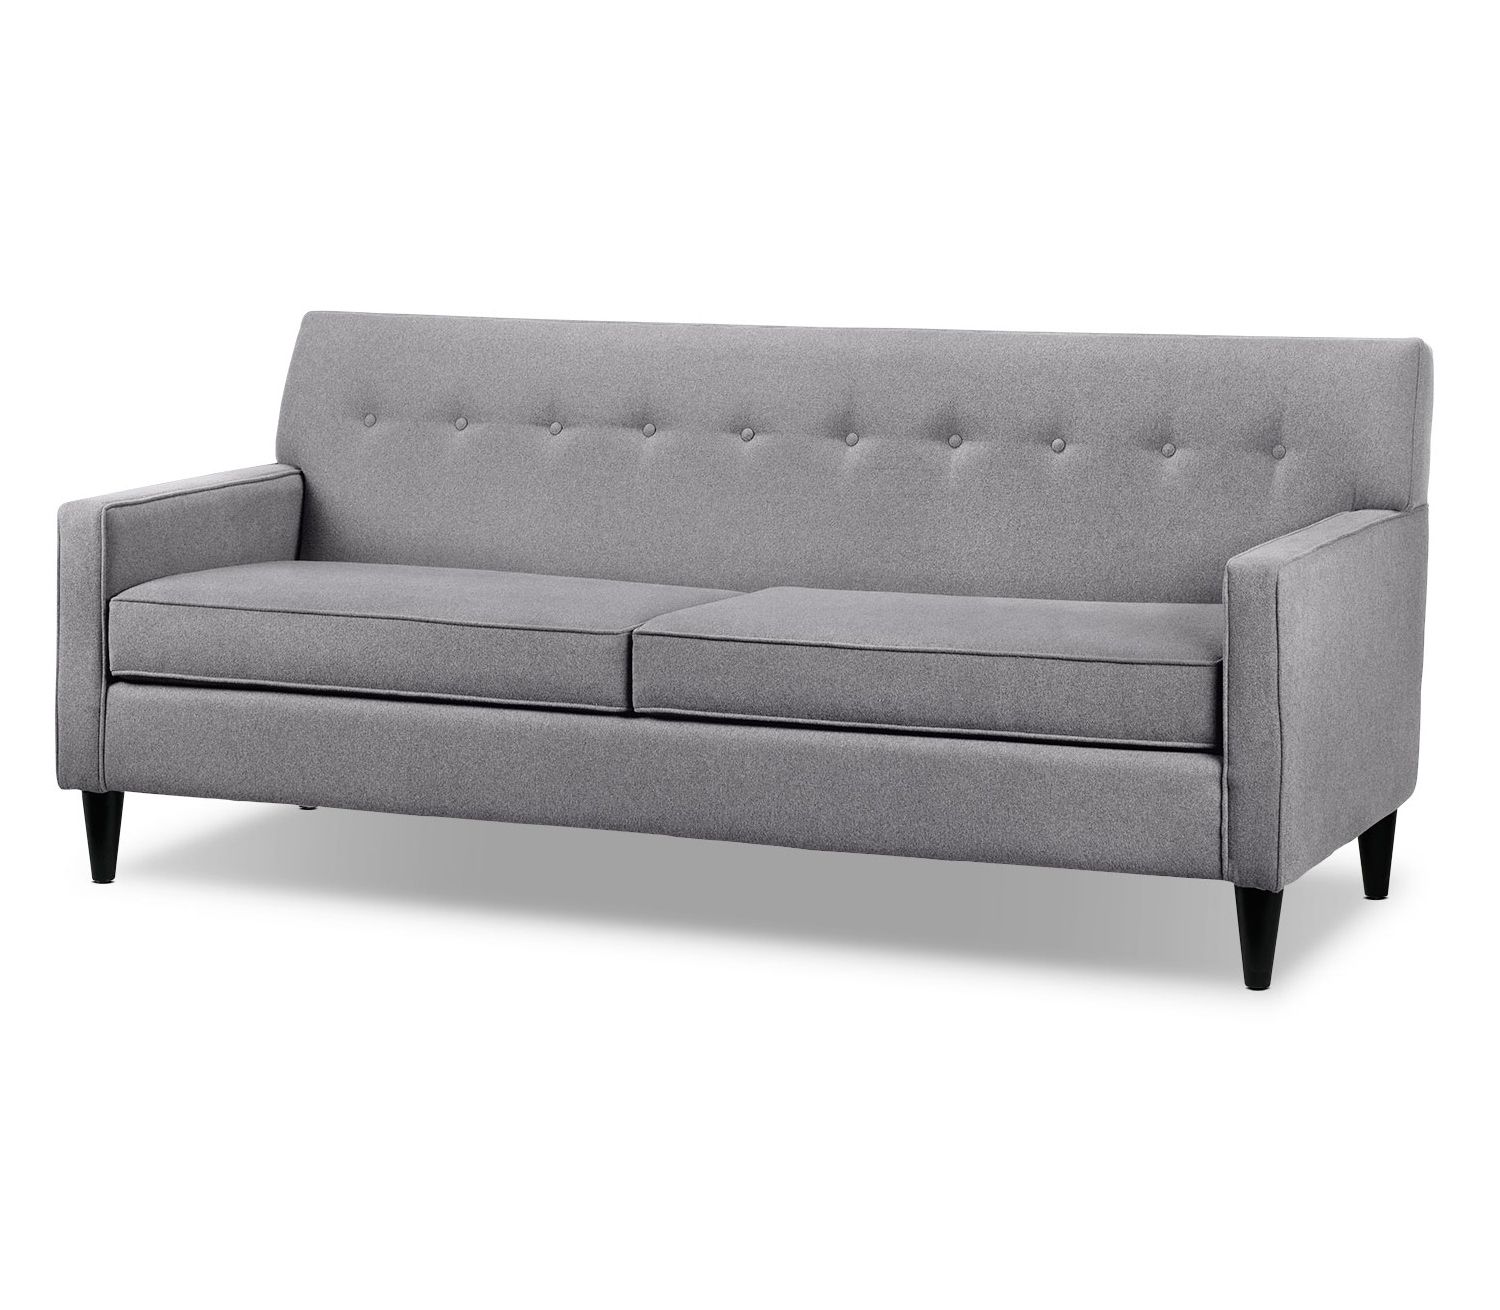 Newfoundland Sectional Sofas With Regard To Best And Newest Specter Sofa – Hayward's – The Best Furniture St (View 13 of 15)